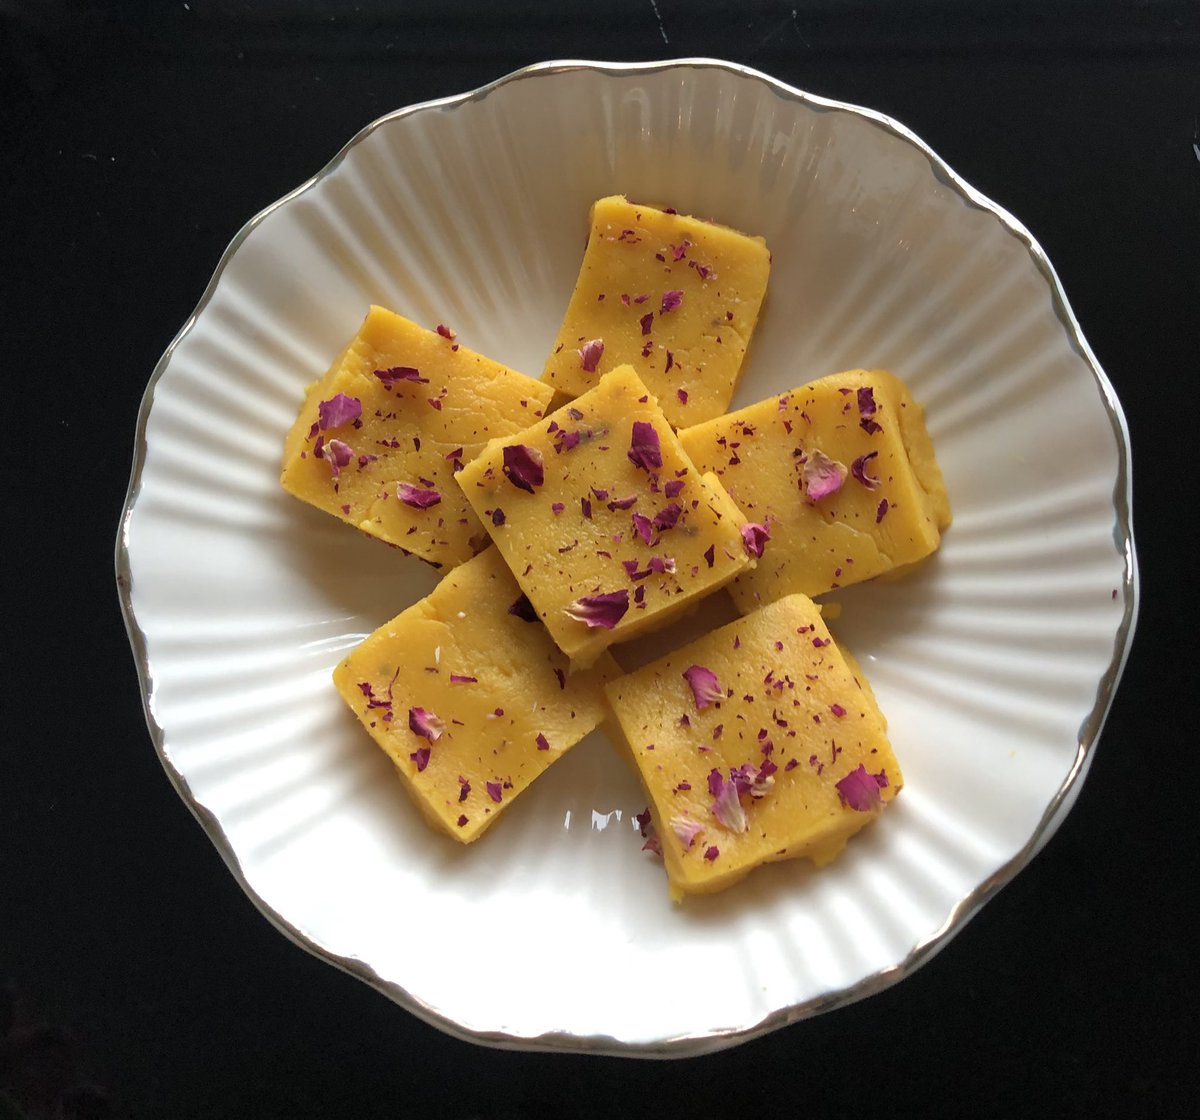 Melt-in -your-mouth goodness with a tropical twist - homemade rose mango burfi 🥭🌹🥭🌹 This is a delicious treat for any occasion. The addition of fragrant rose pastels makes its even more special. #rosemangofudge #trending #mangoburfi #rosemangoburfi #viral